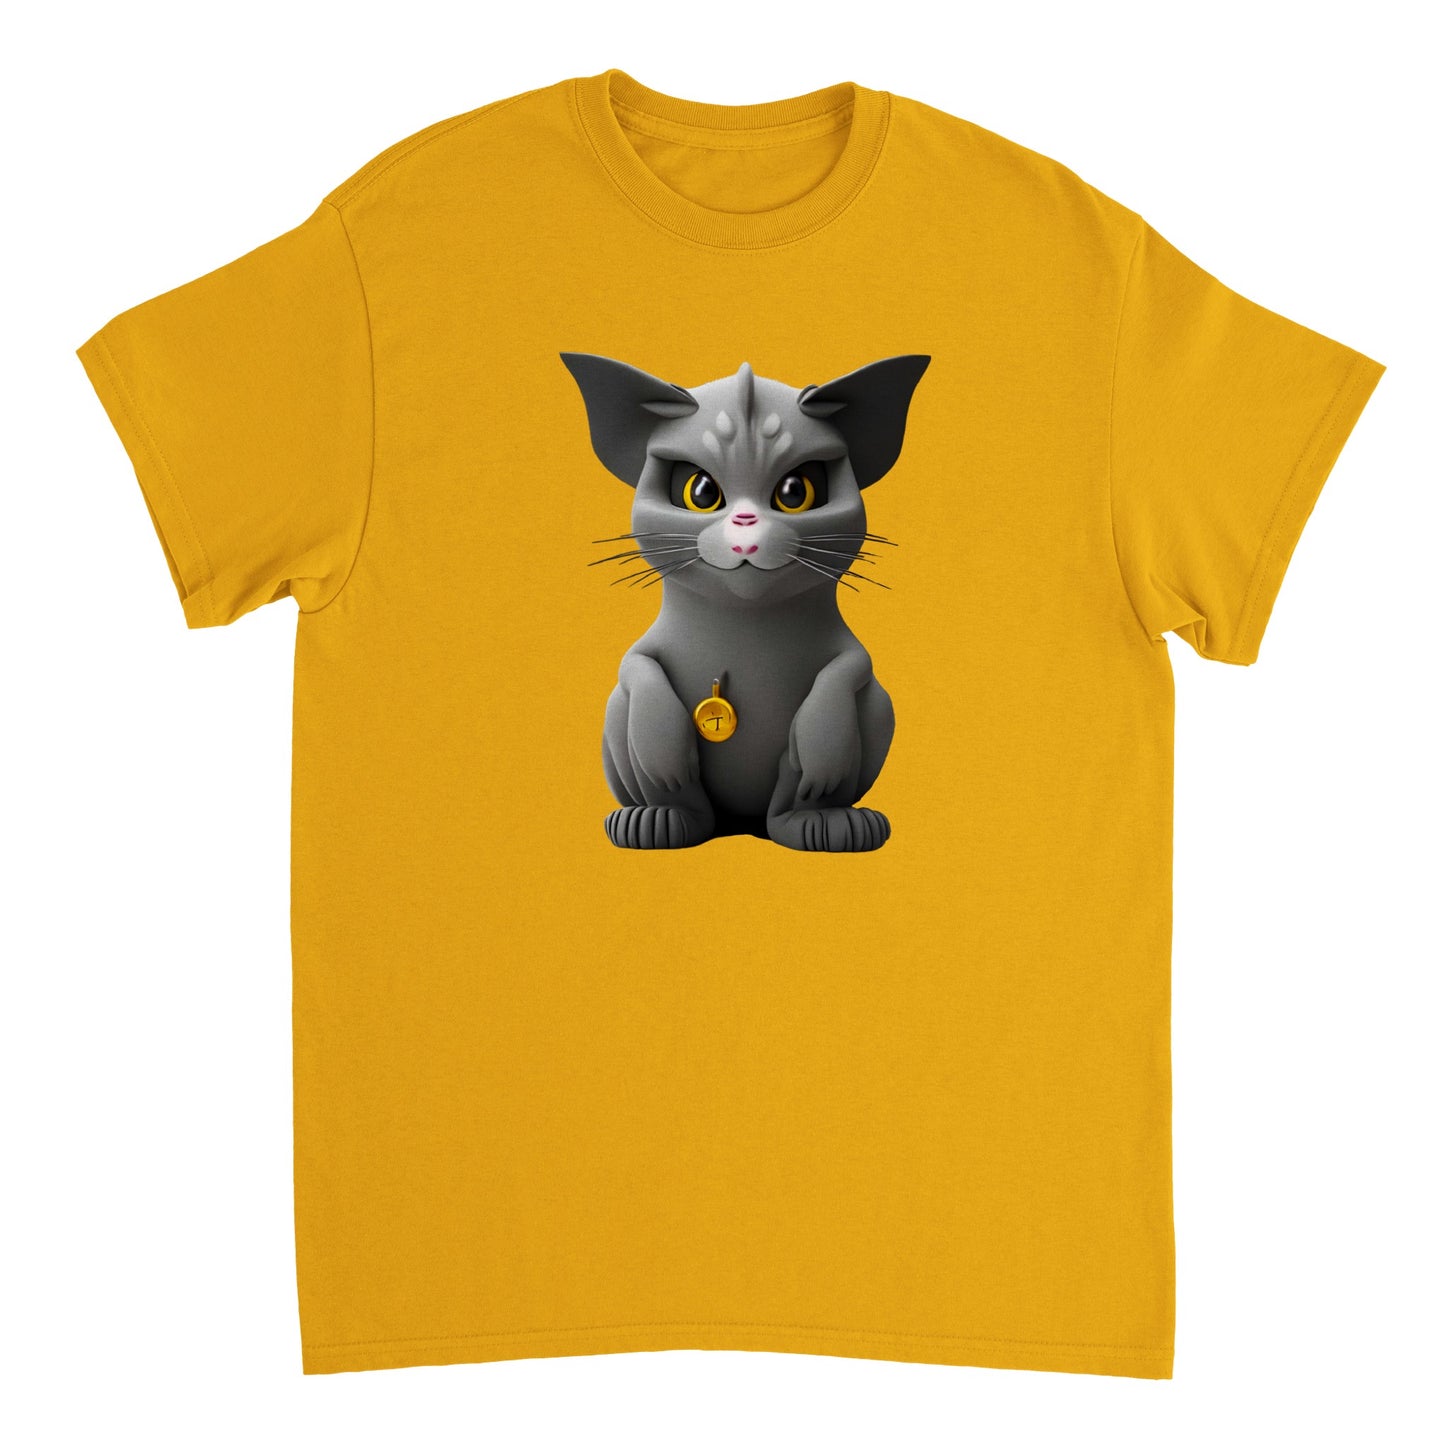 Adorable, Cool, Cute Cats and Kittens Toy - Heavyweight Unisex Crewneck T-shirt 62